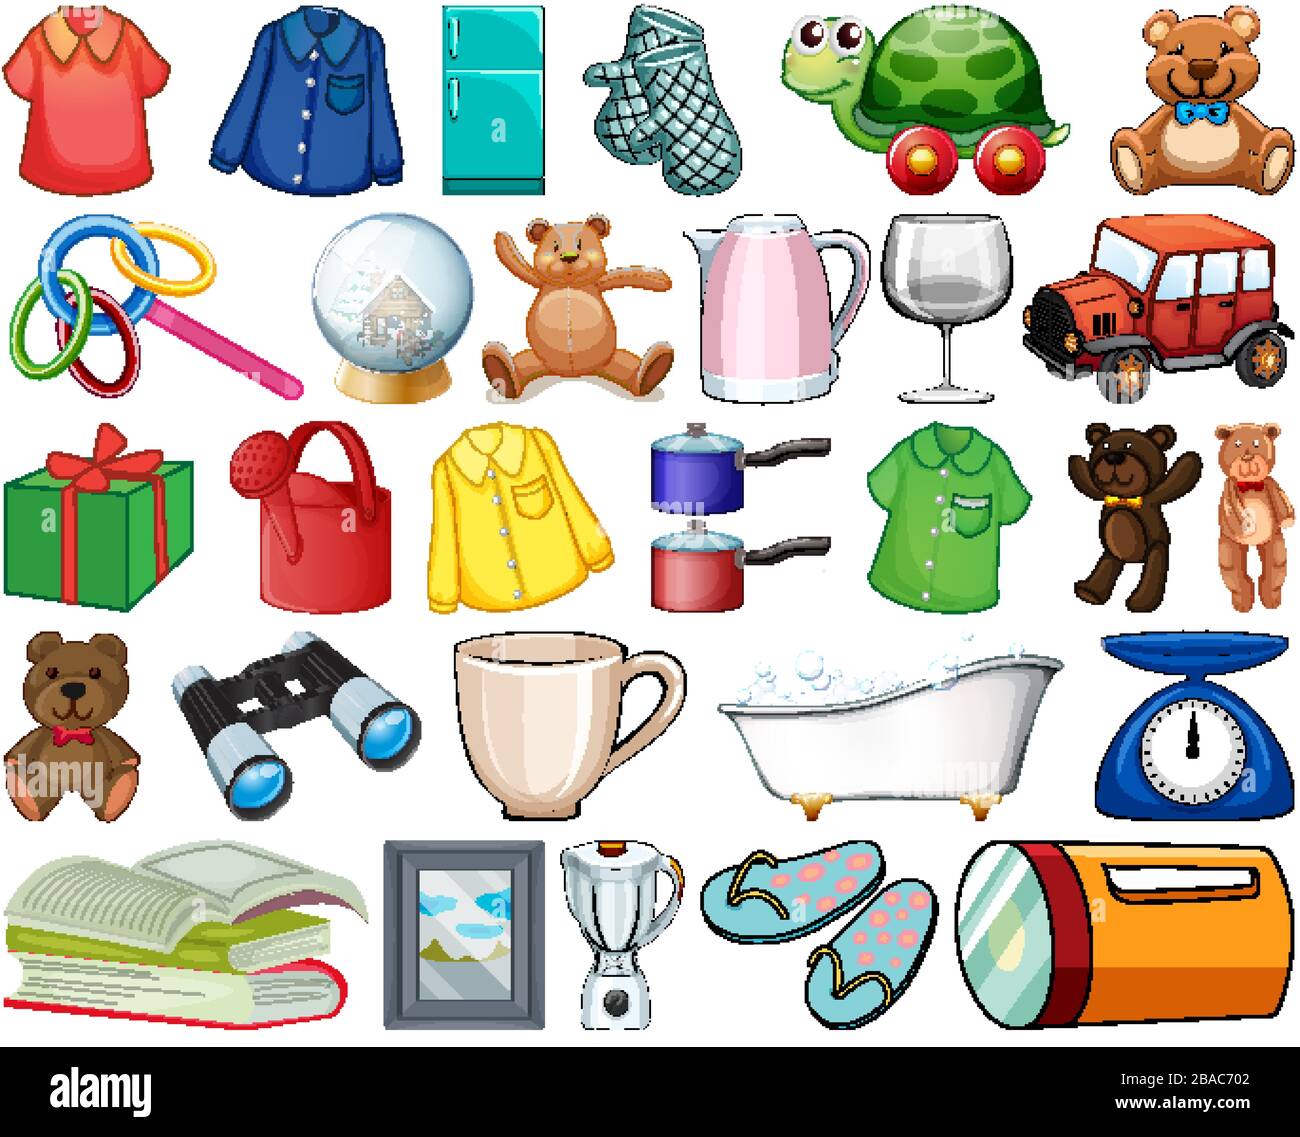 Set of household objects Royalty Free Vector Image